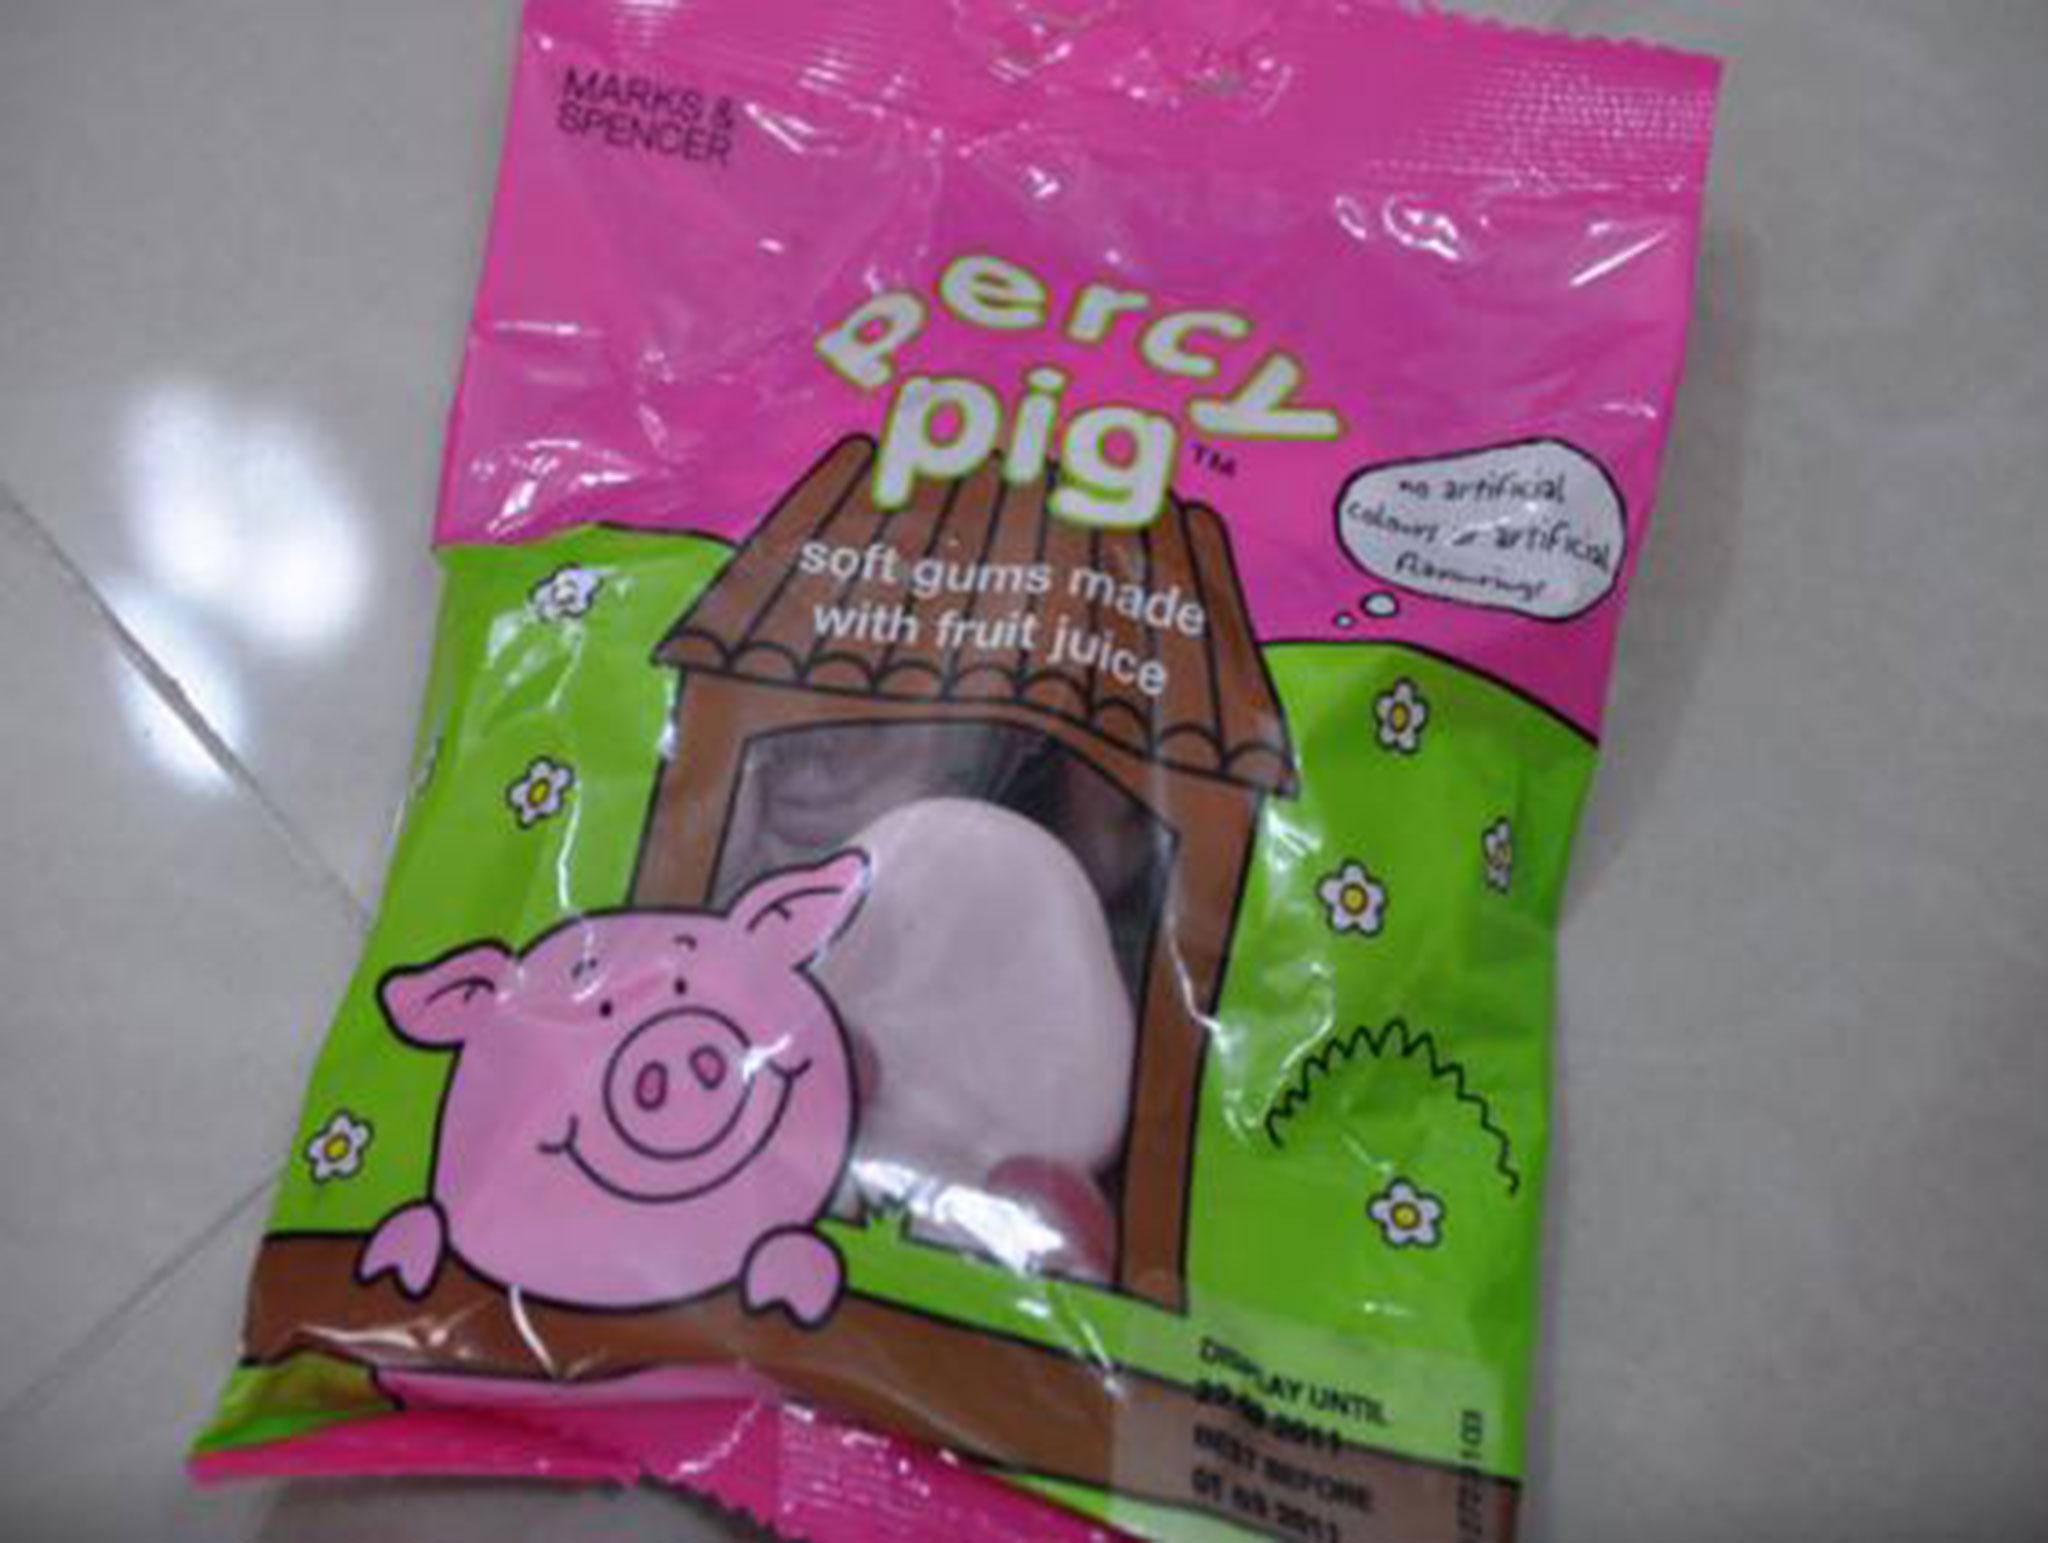 A packet of Percy Pig sweets now costs £1.65